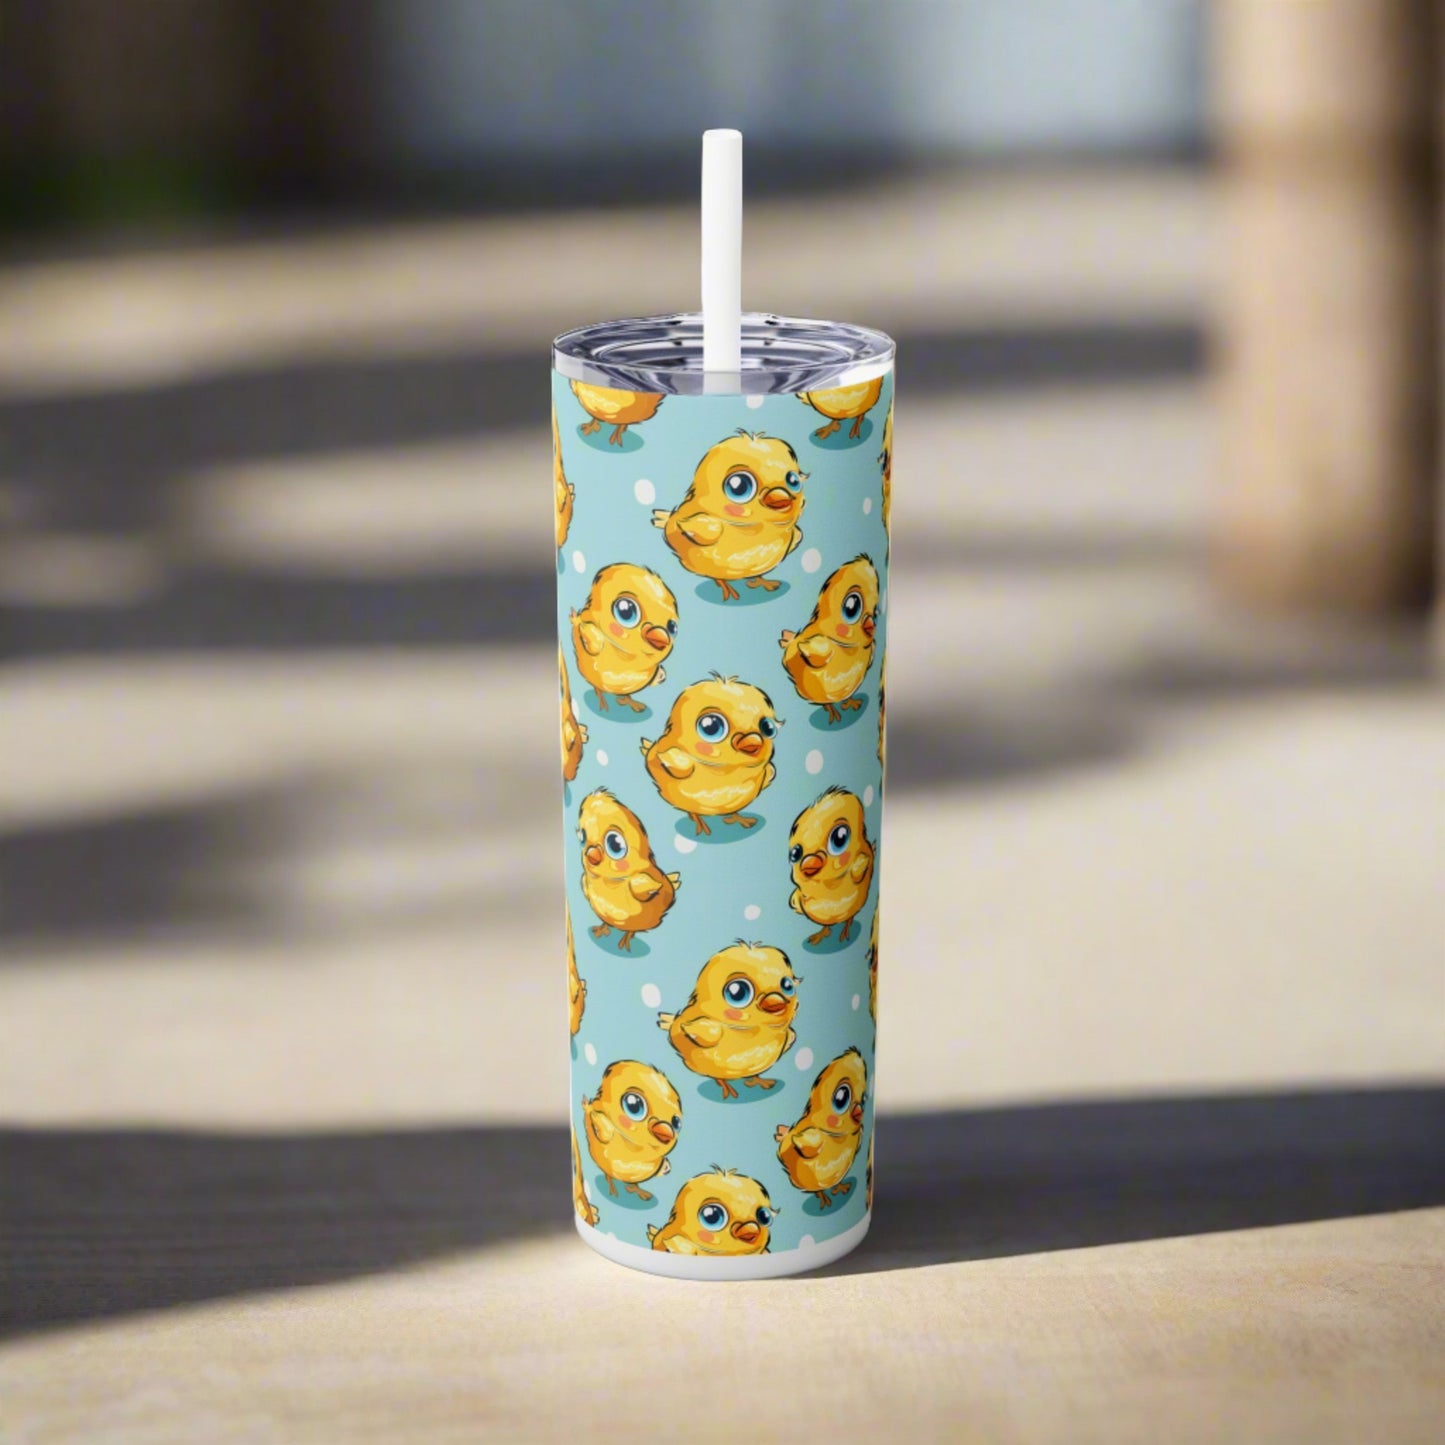 Insulated 20 oz Tumbler with Lid & Straw, Cute Baby Chicks - Double-walled Stainless Steel, Keeps Drinks Hot or Cold